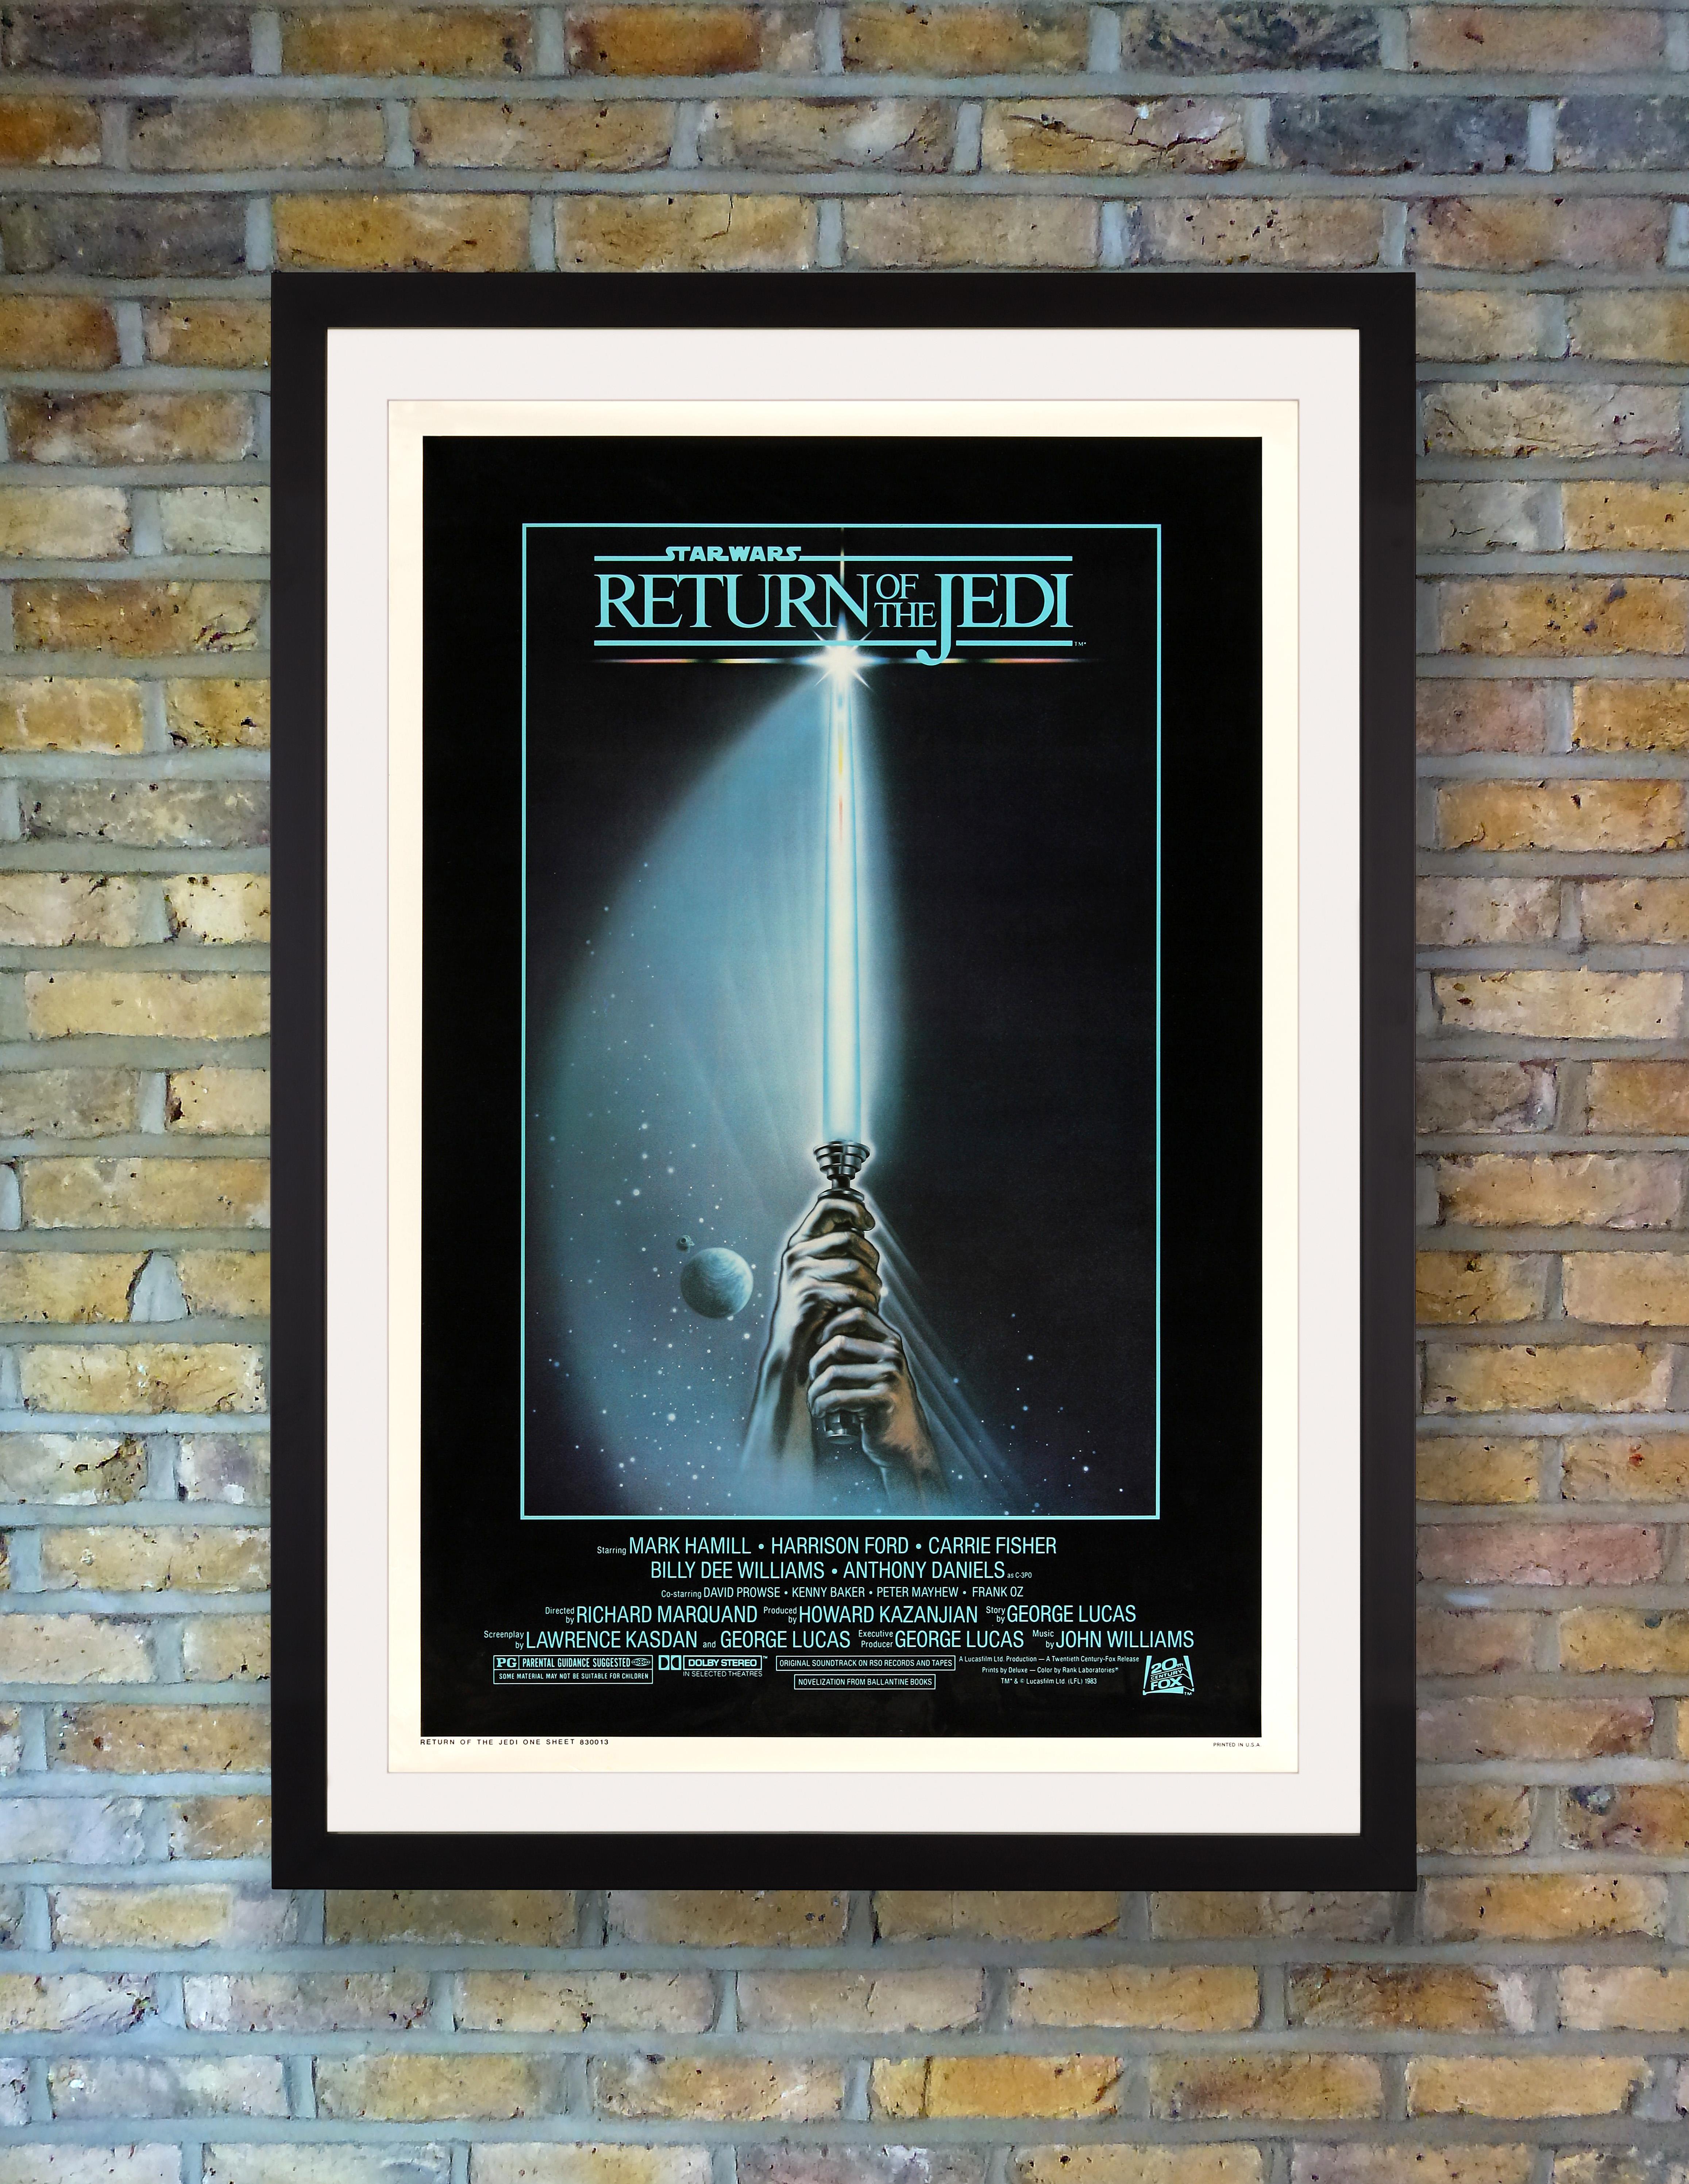 Tim Reamer's simple and effective design for the final instalment of George Lucas' original Star Wars trilogy has become emblematic of the entire saga, with its glowing lightsaber beaming out of the darkness as a symbol of hope against the dark